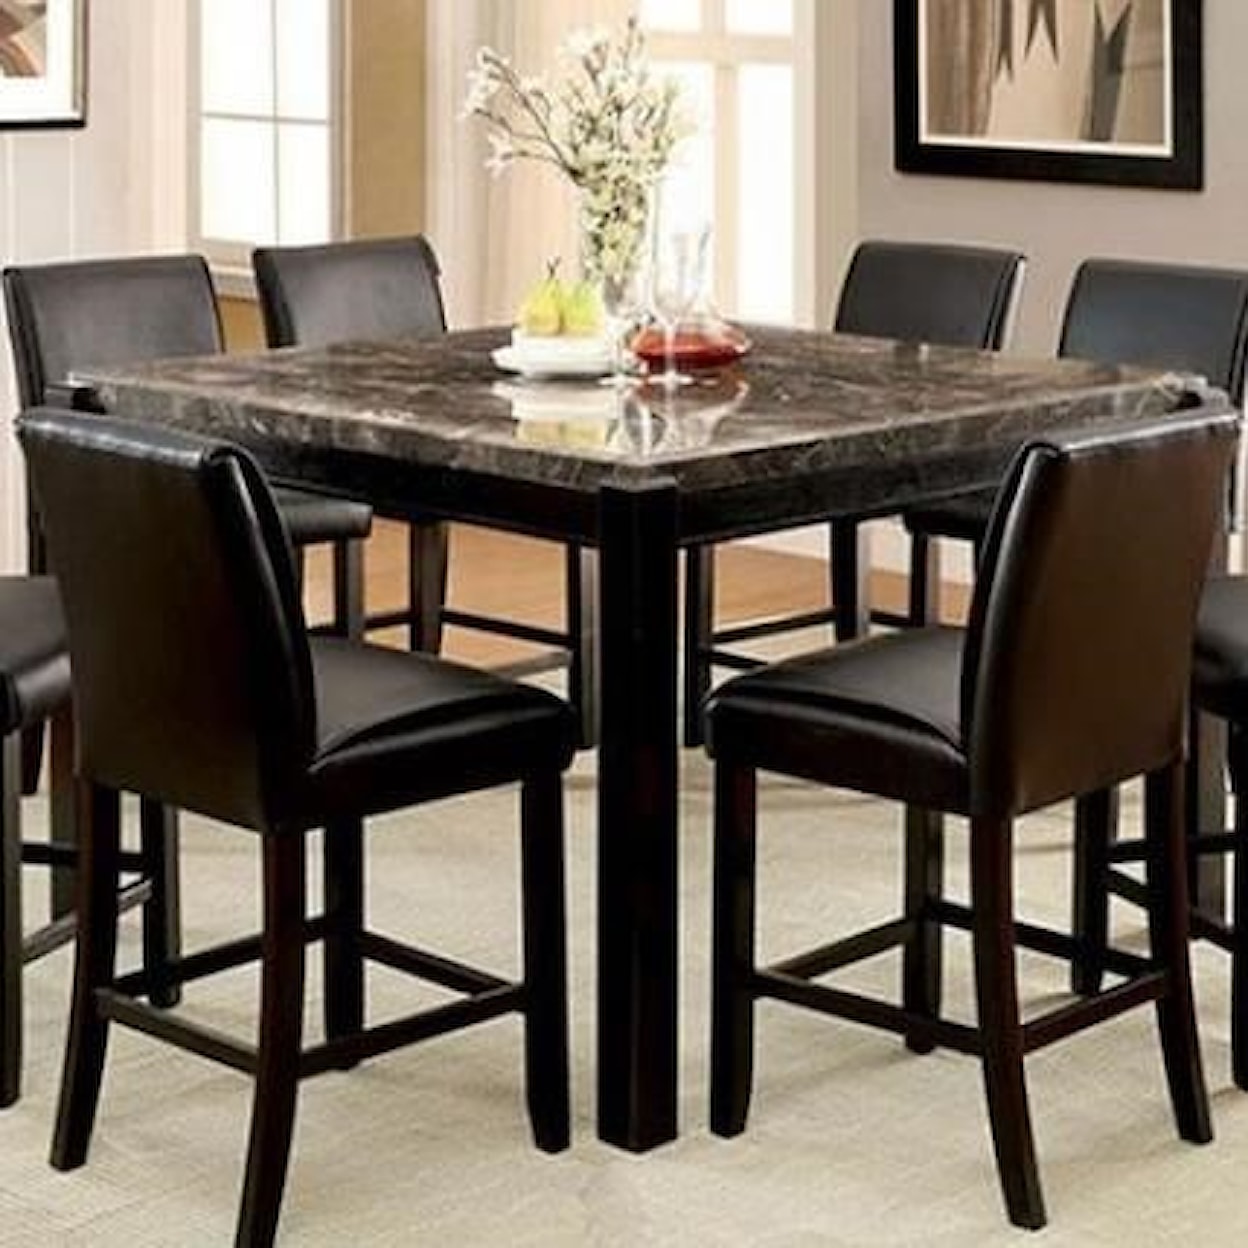 FUSA Grandstone II Counter Height Dining Table